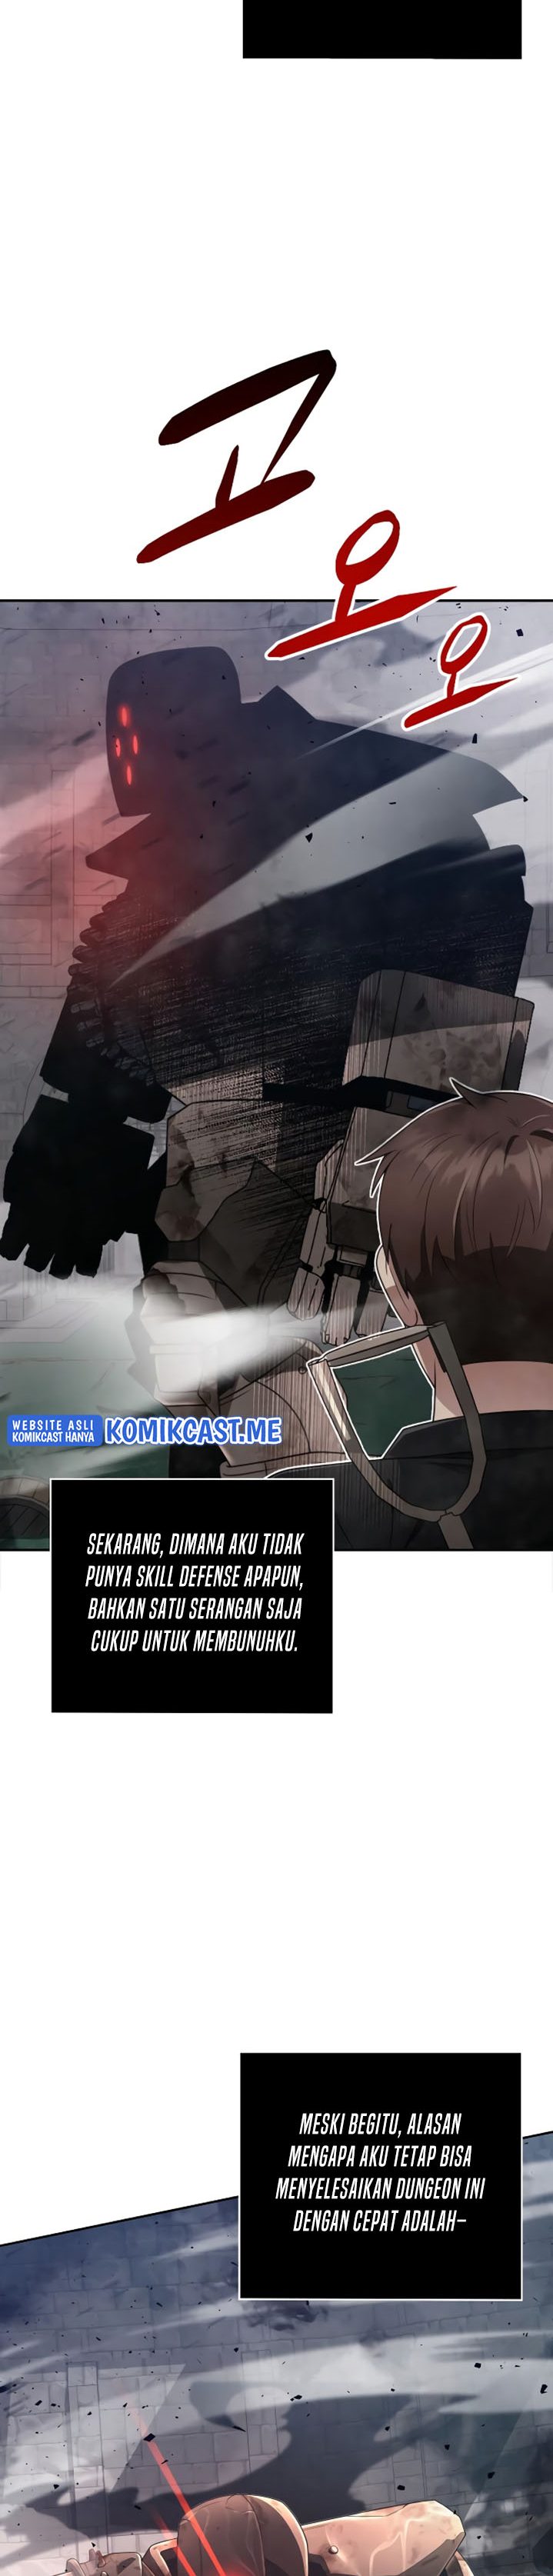 Dilarang COPAS - situs resmi www.mangacanblog.com - Komik clever cleaning life of the returned genius hunter 011 - chapter 11 12 Indonesia clever cleaning life of the returned genius hunter 011 - chapter 11 Terbaru 7|Baca Manga Komik Indonesia|Mangacan